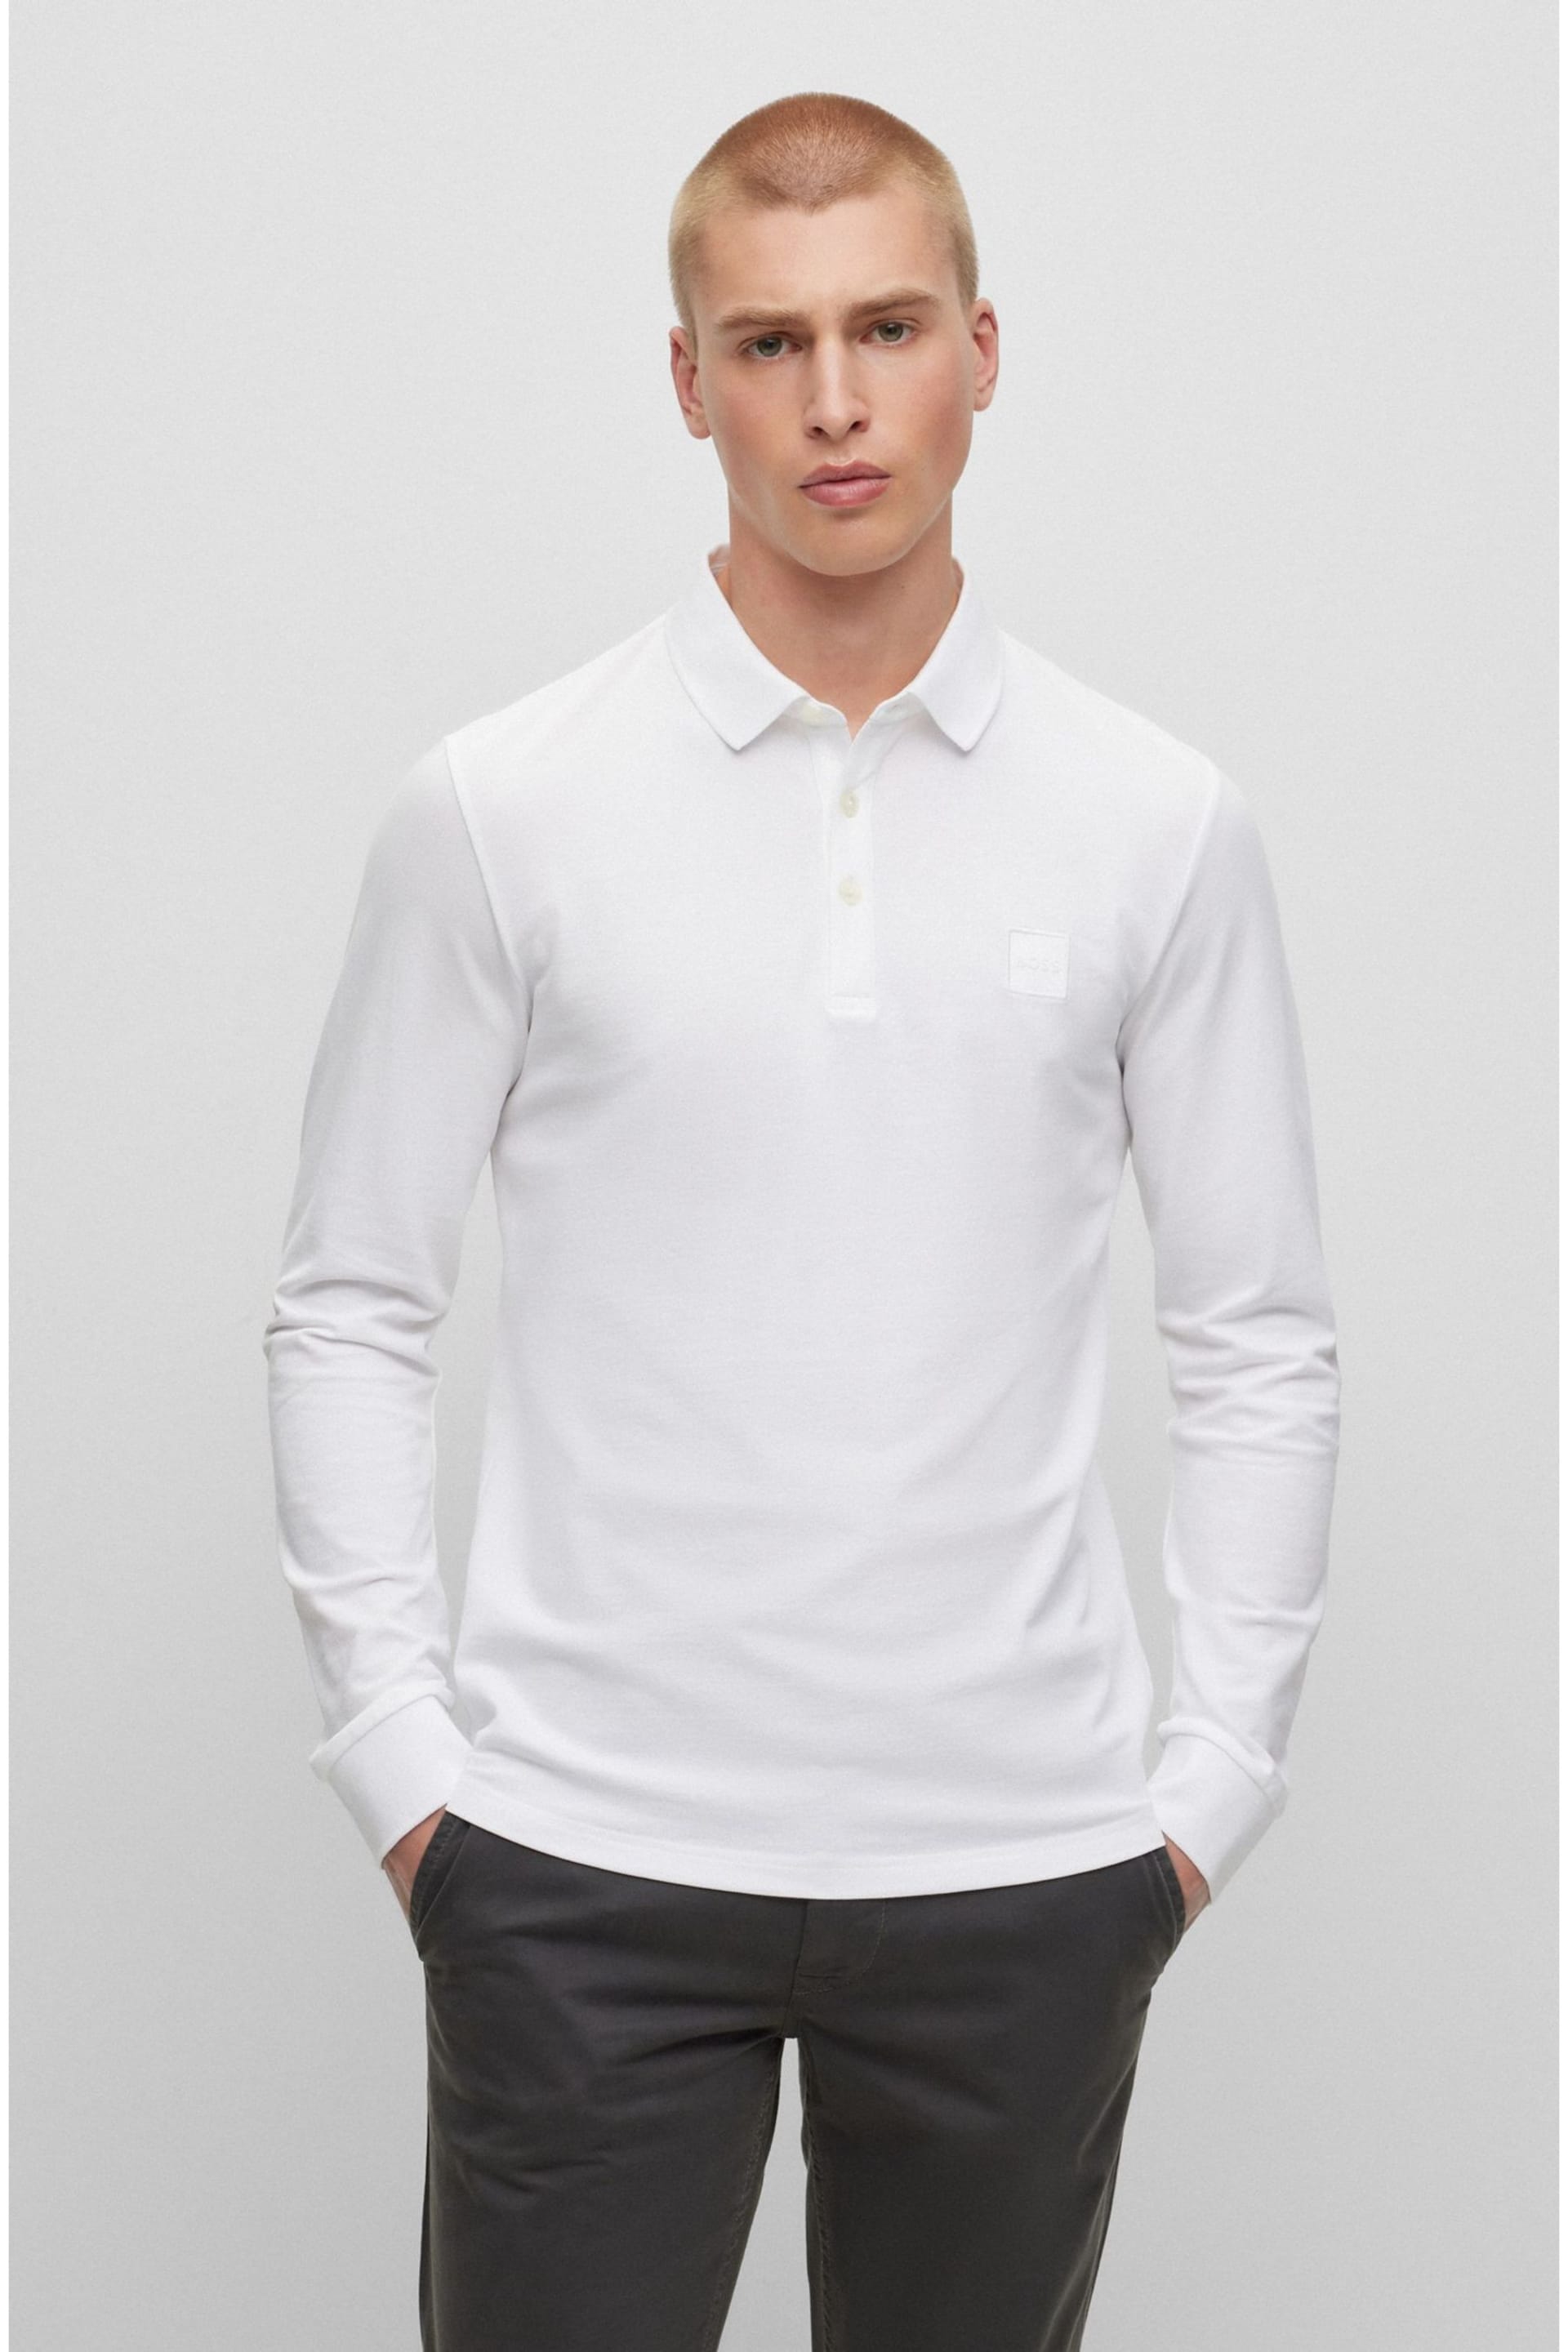 BOSS White Chrome Passerby Polo Shirt - Image 1 of 5